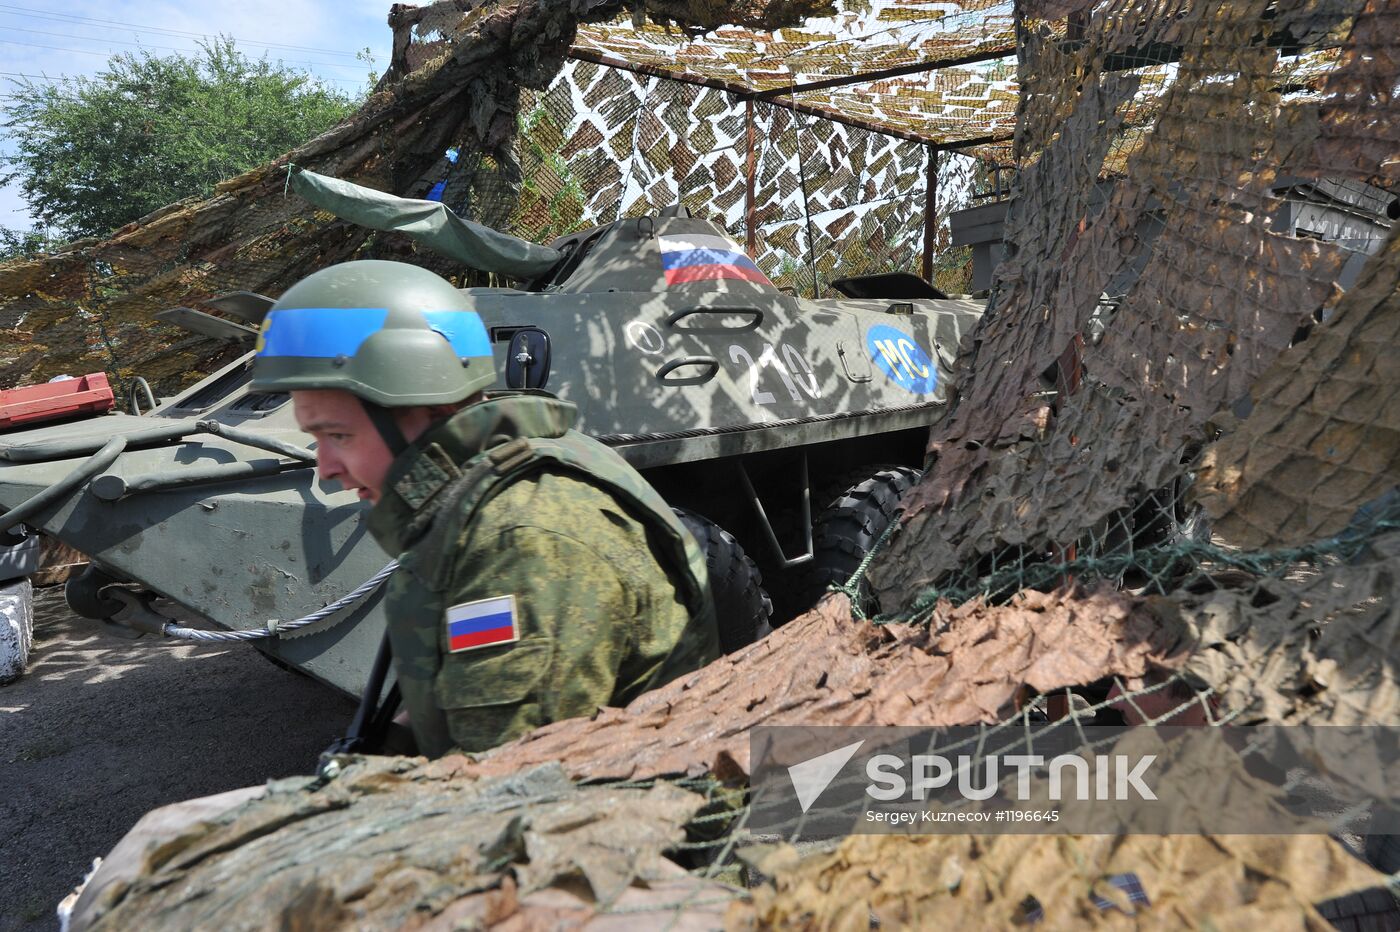 Russian peacekeepers' checkpoint at entrance to Bender